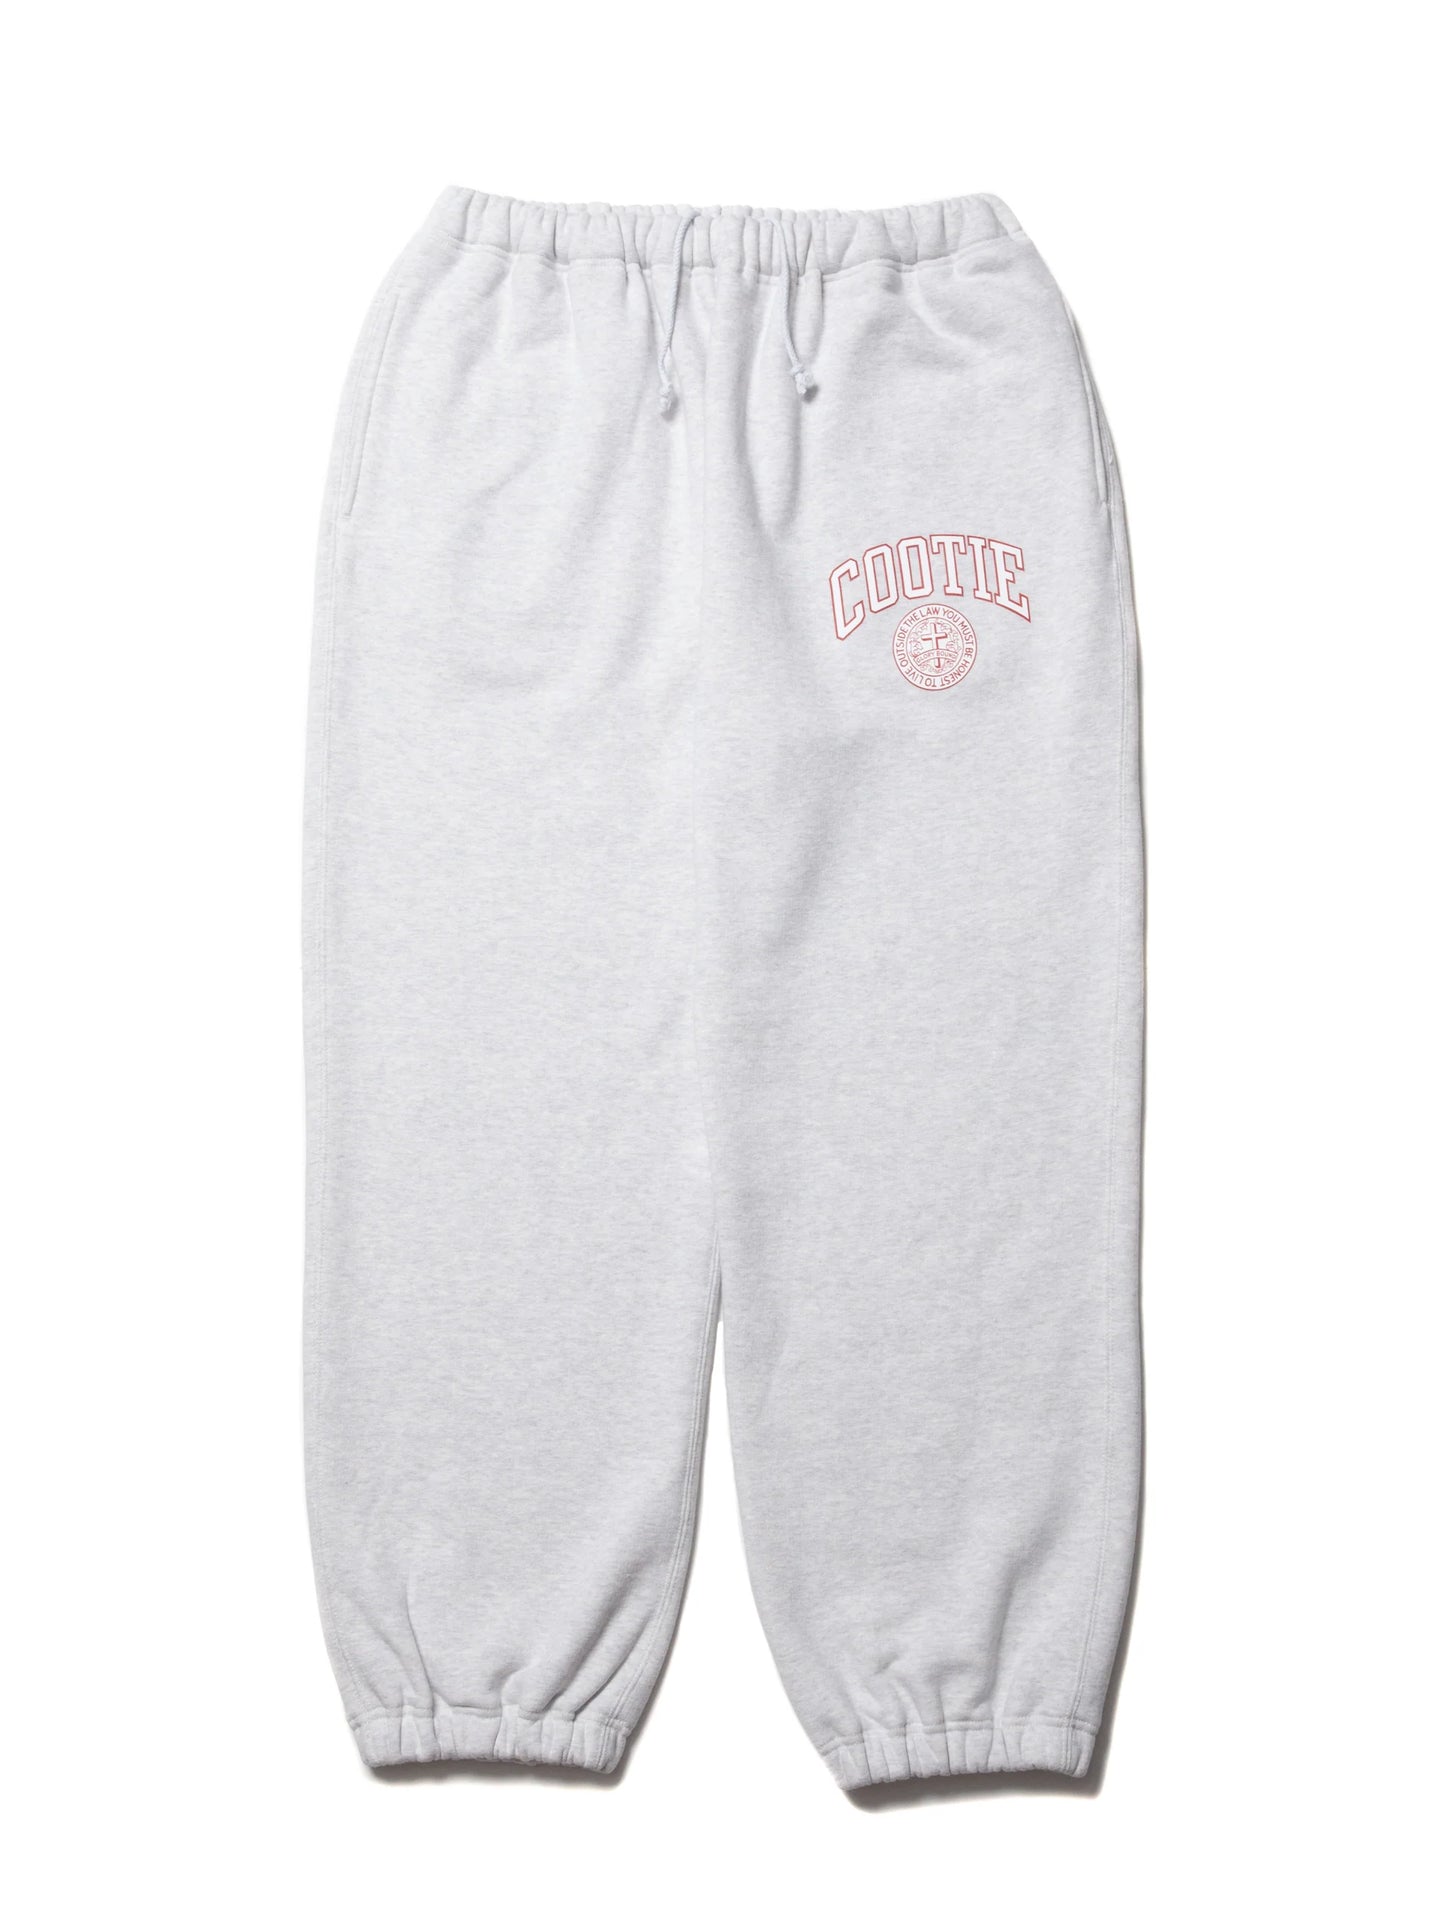 COOTIE PRODUCTIONS HEAVY OZ SWEAT EASY PANTS (COLLEGE)